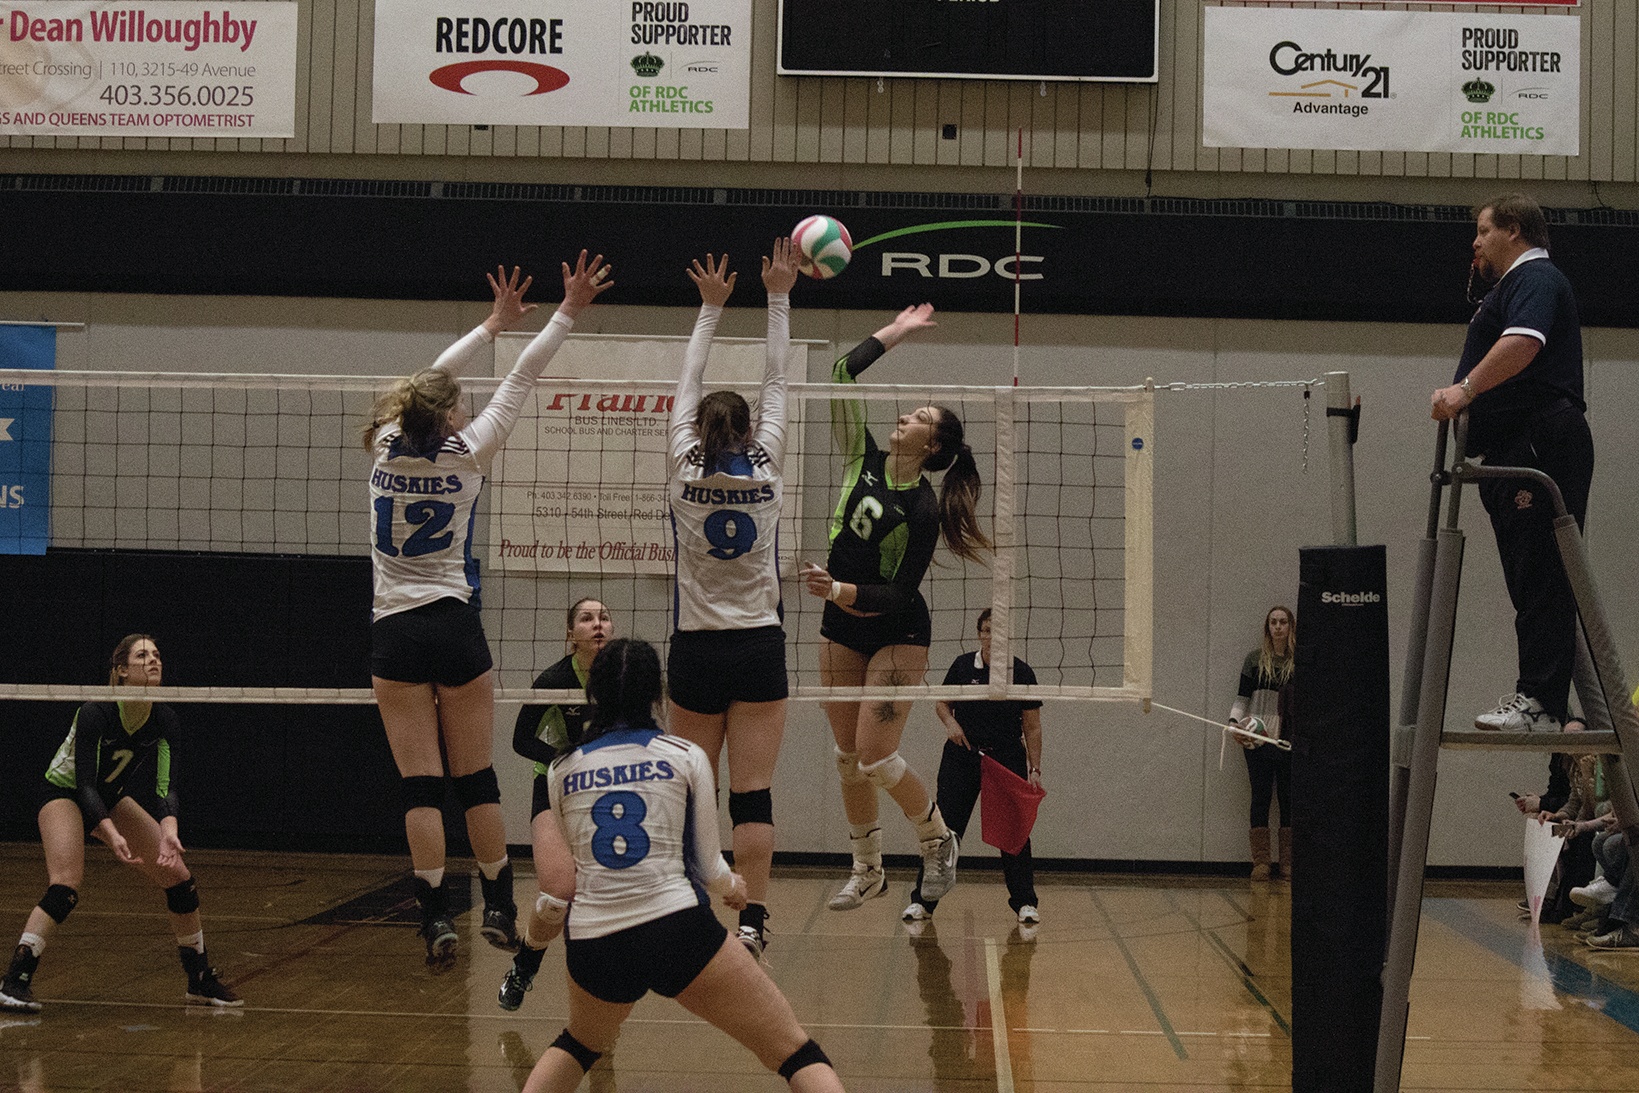 CLOSE CALL - Red Deer College hosted the provincial volleyball championship tournament this weekend. During a game on Friday afternoon